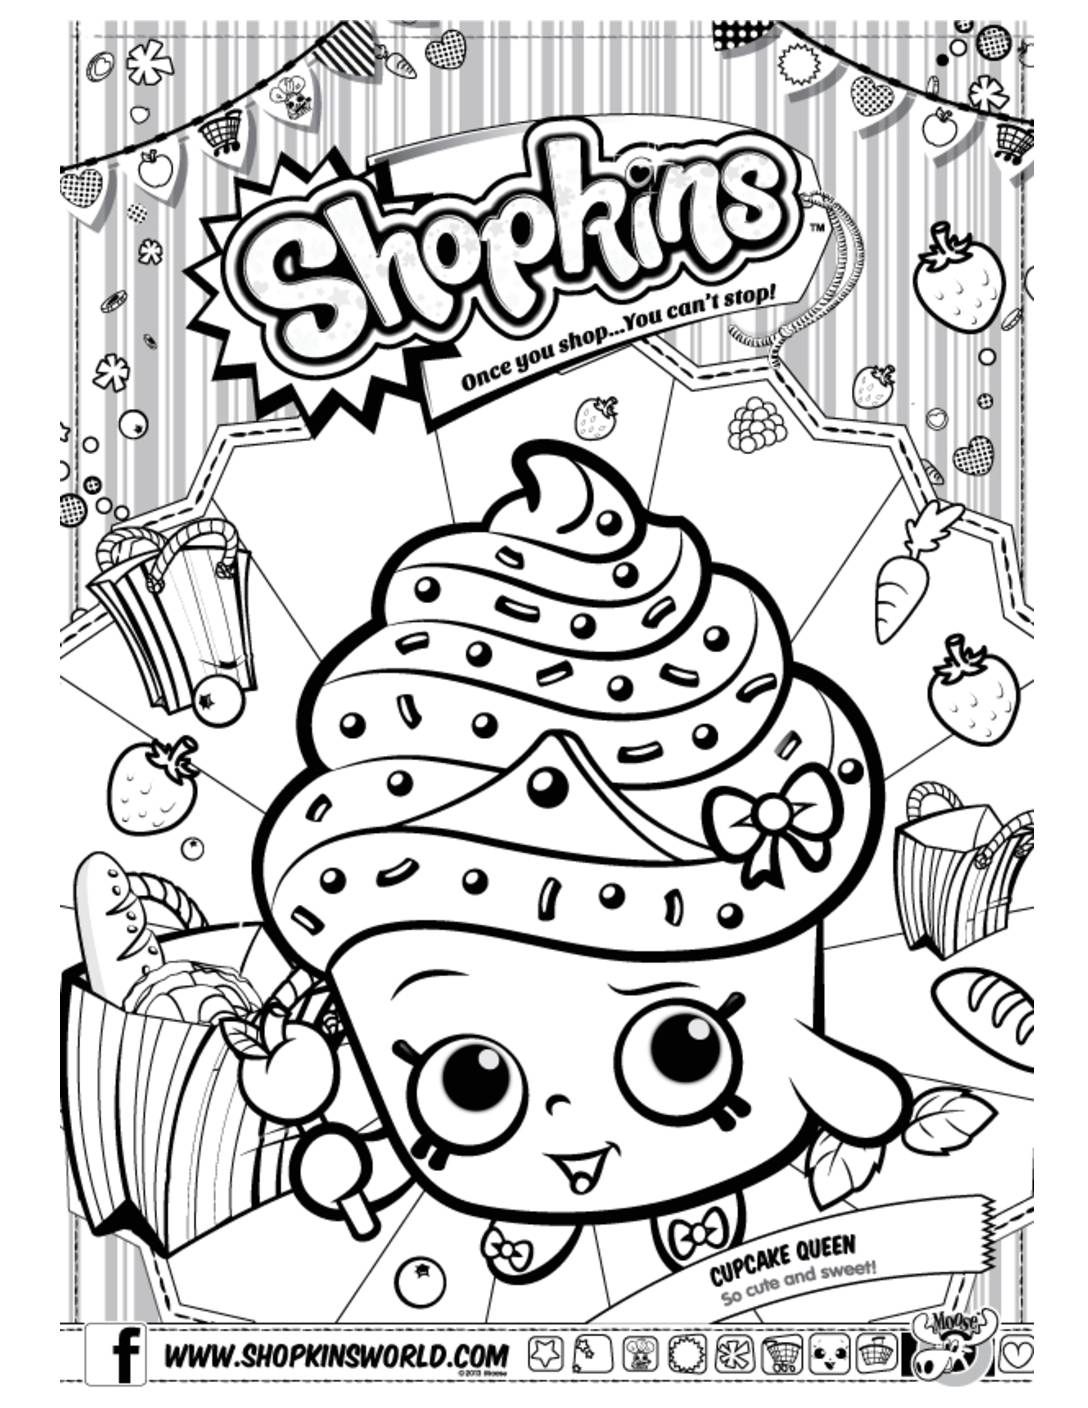 Shopkins Coloring Page 7 Coloring Pages